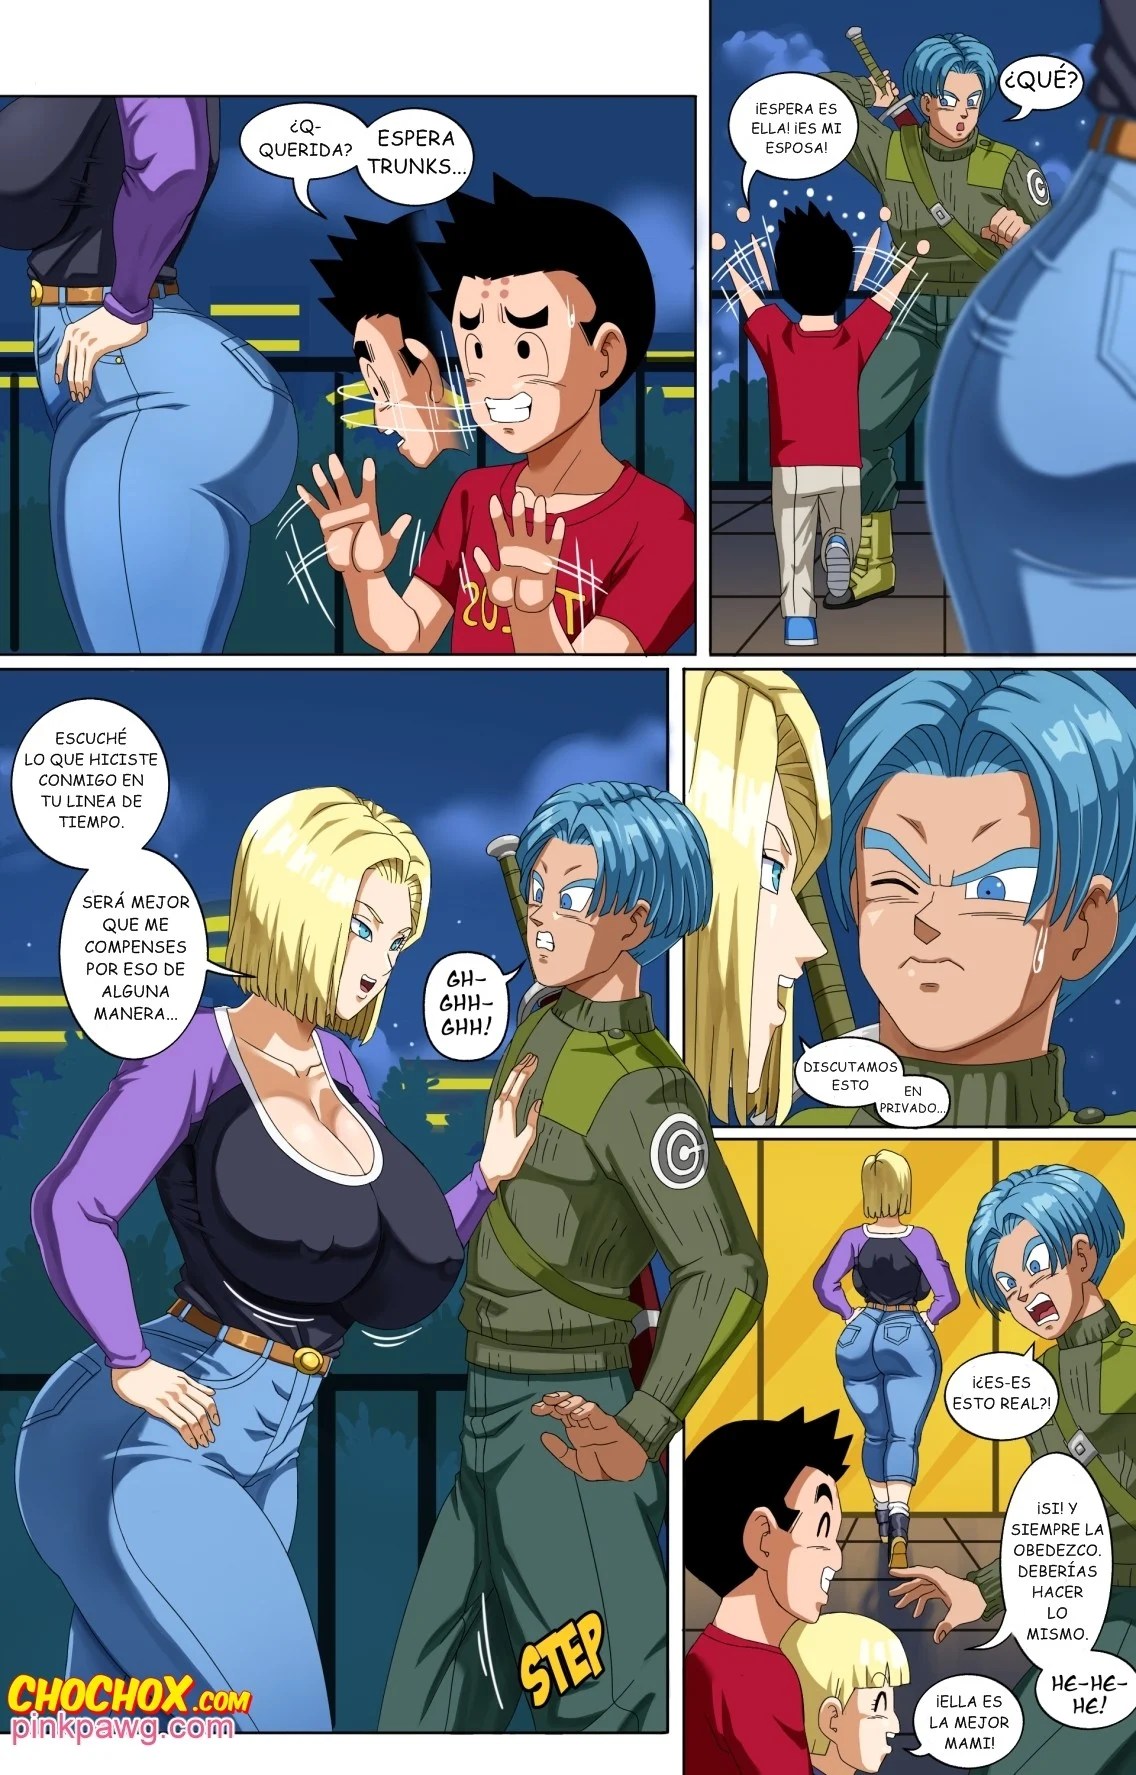 Android 18 and Trunks – PinkPawg - ba2827e794b594c0c35b907ffa86d430